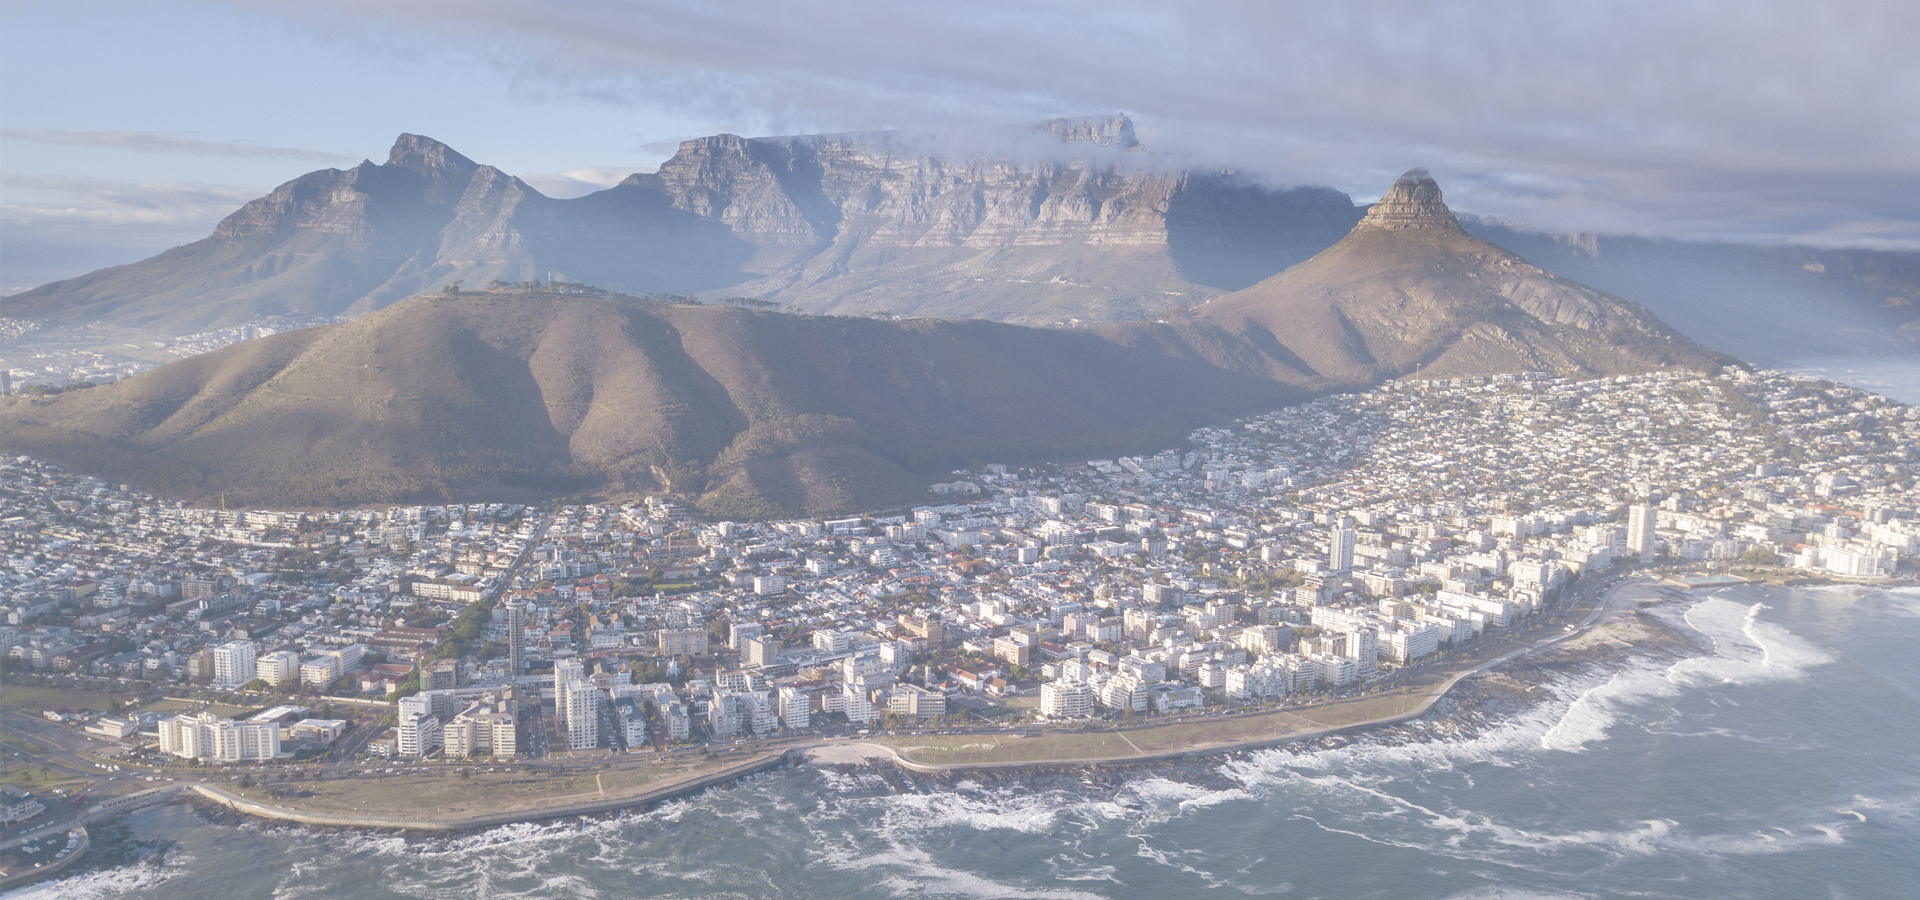 Aerial view over Cape Town, South Africa with Table Mountain